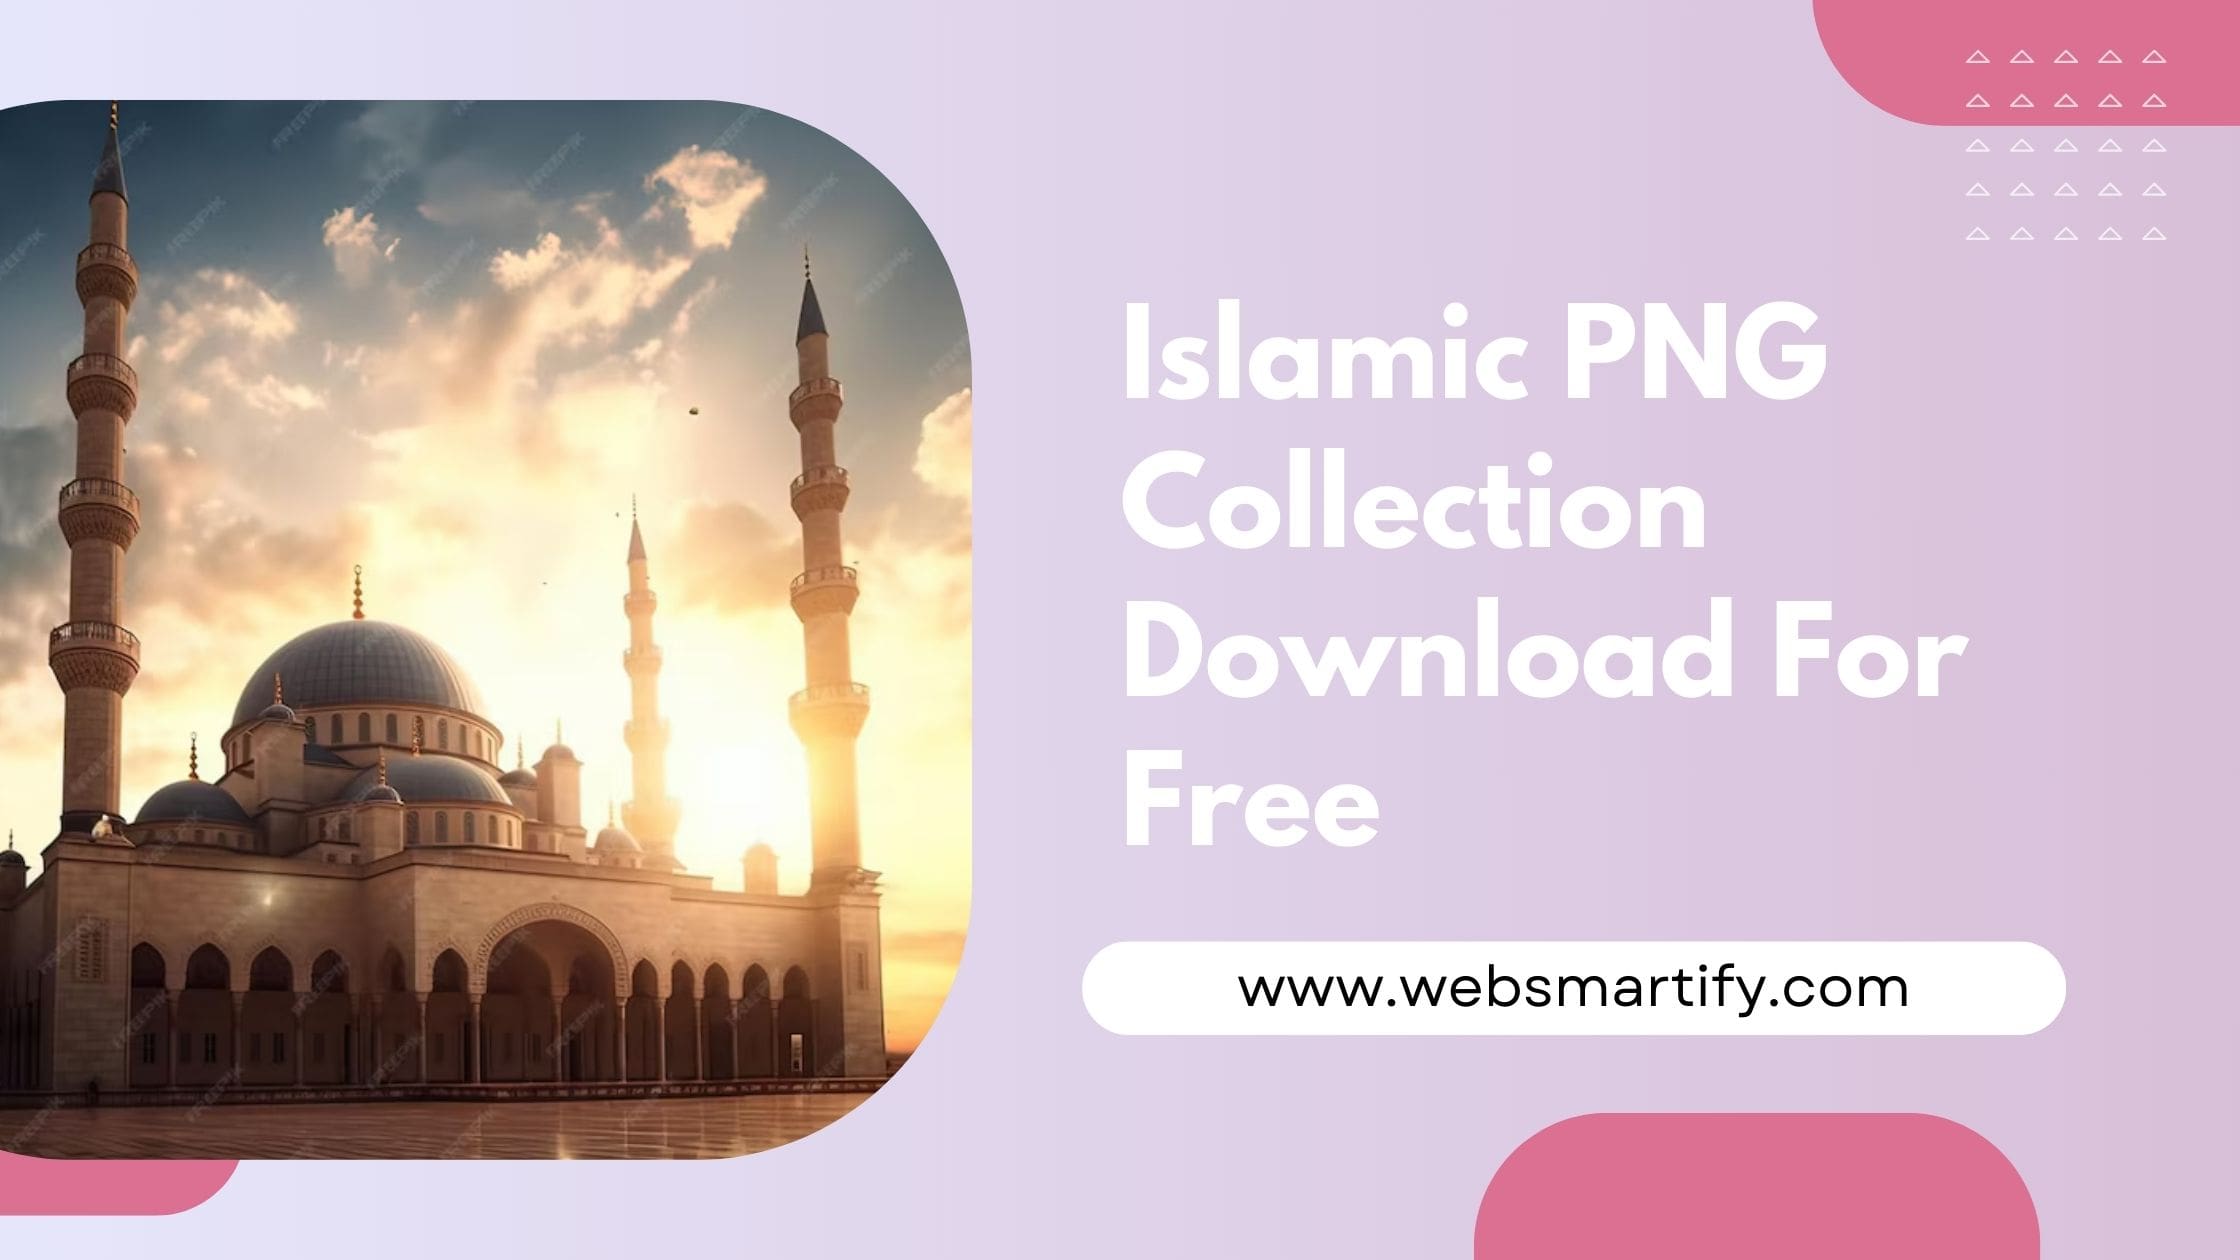 Islamic PNG collection download for free - Websmartify